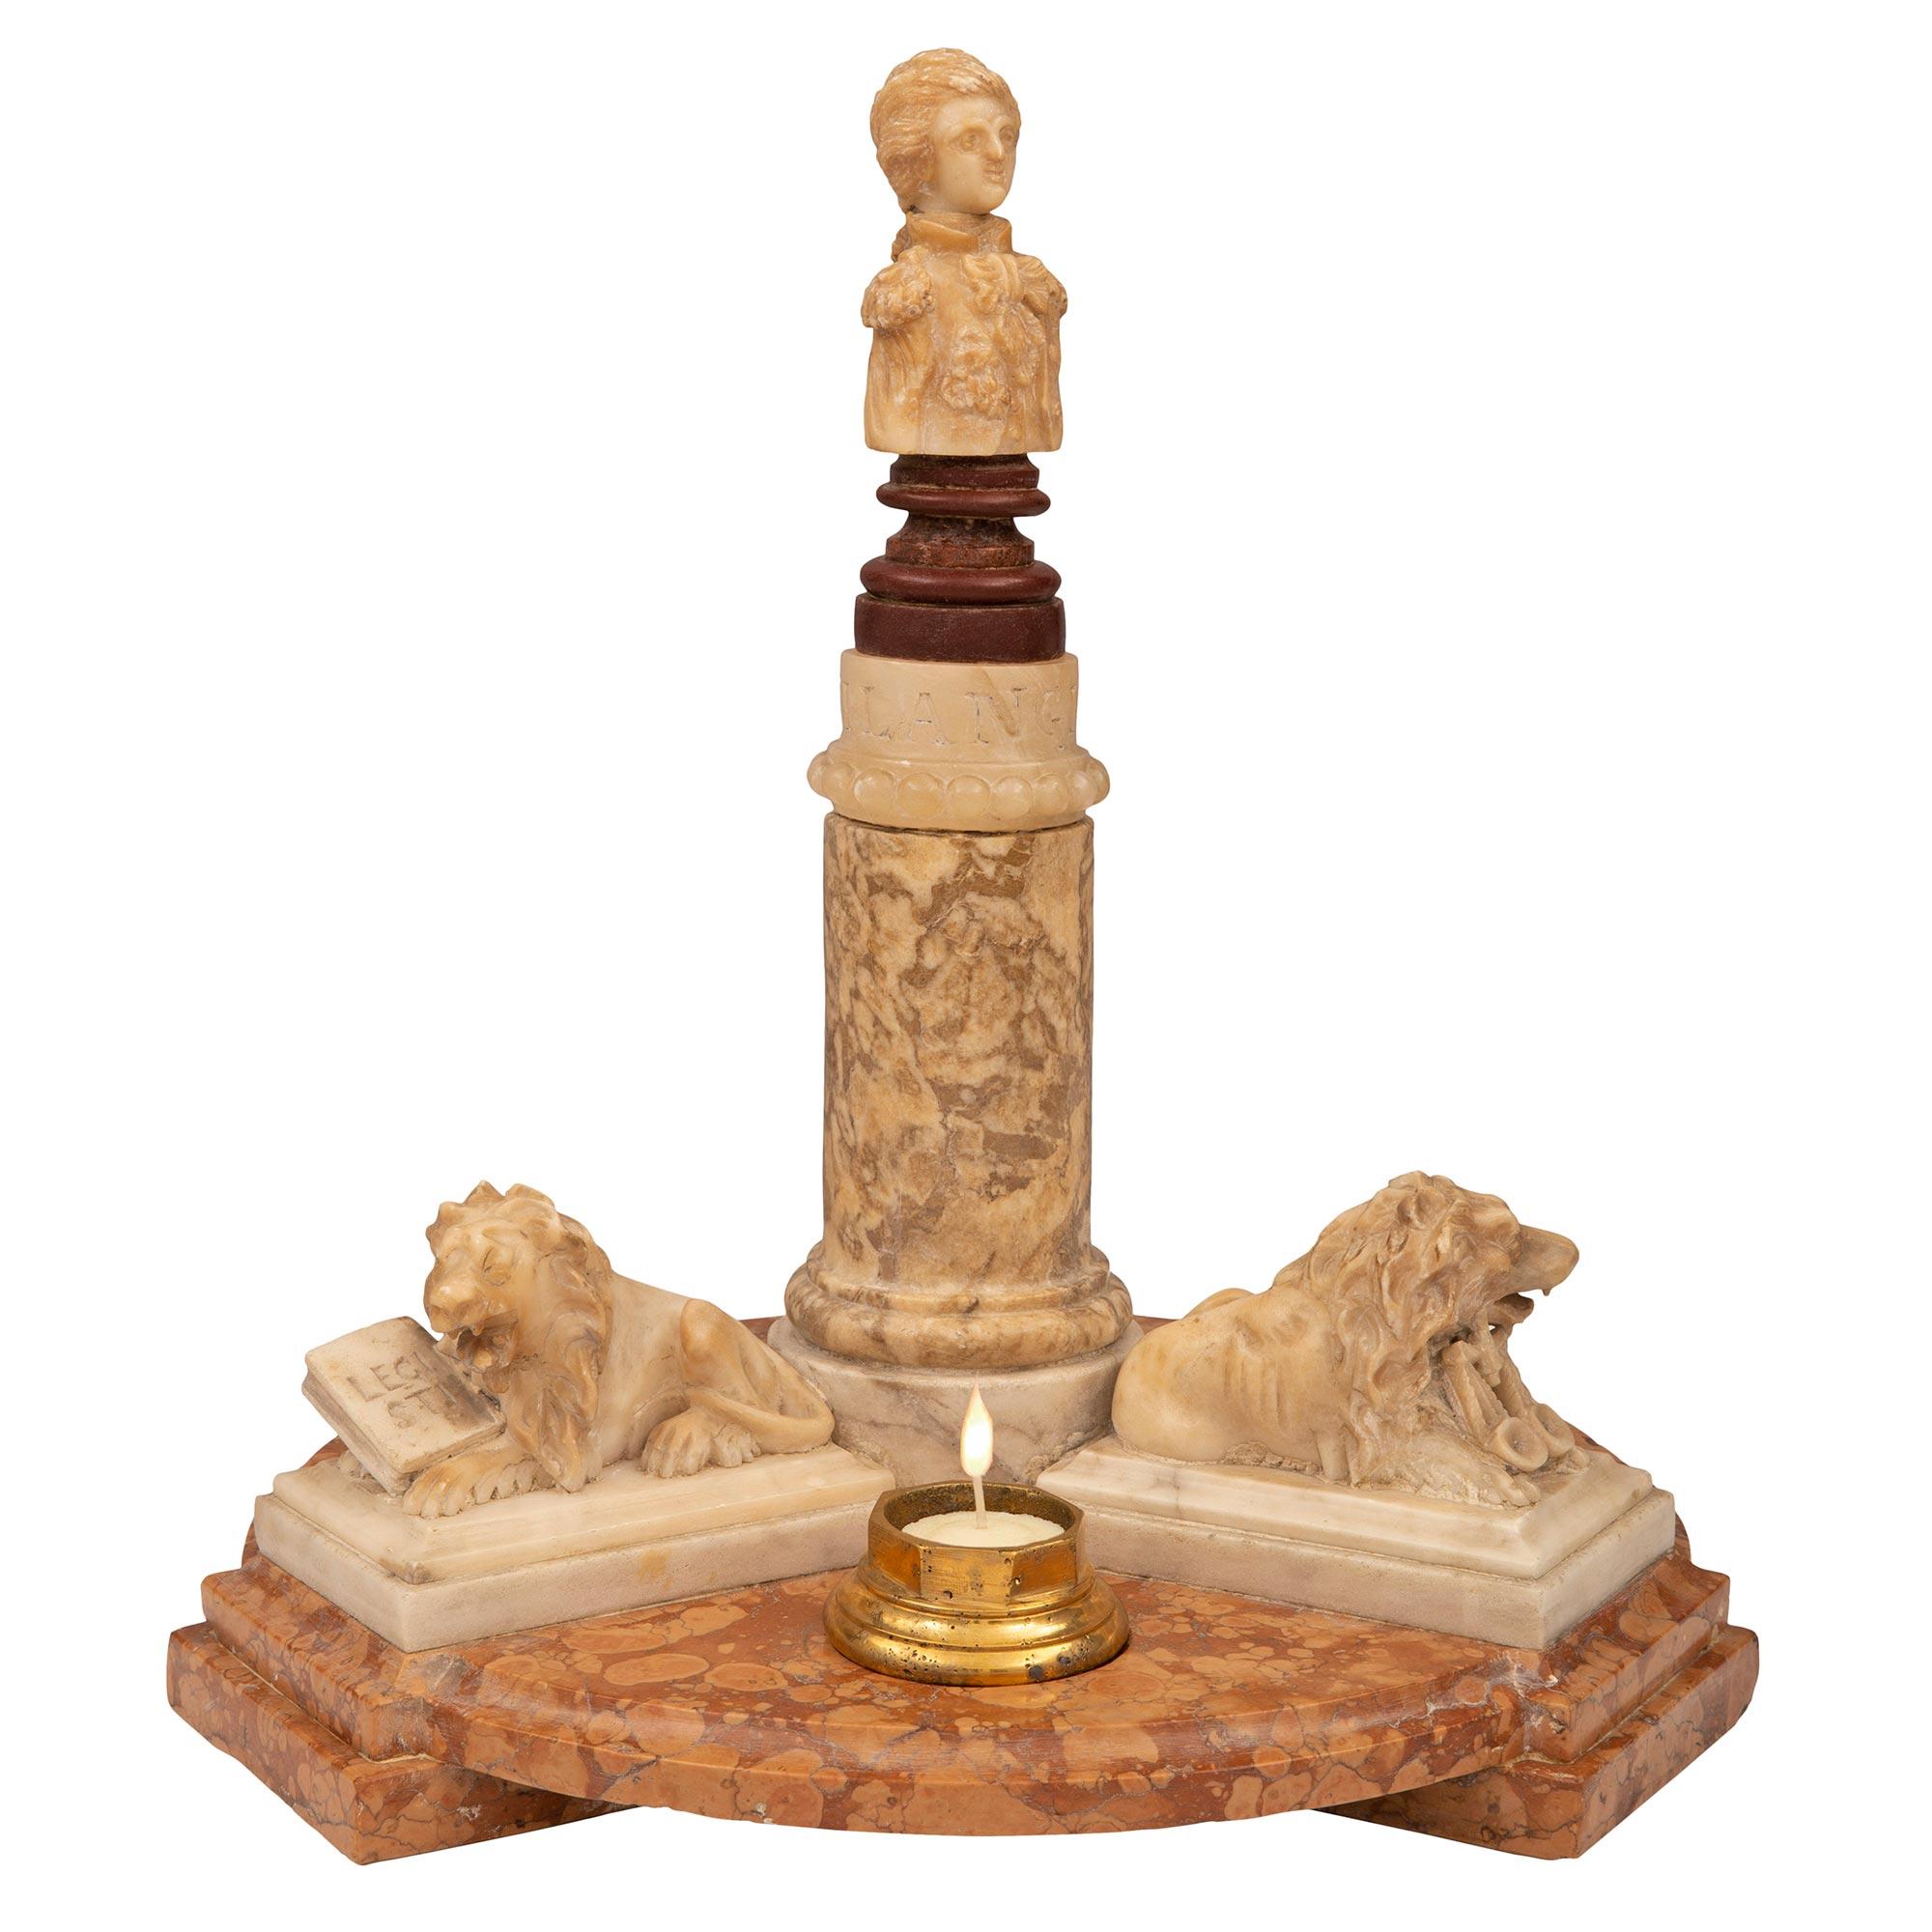 An exquisite Italian mid 19th century alabaster, porphyry and marble centerpiece. The centerpiece is raised by a round moulded Breccia de Guillestre marble base with three rectangular mottled supports below. On top of the base are three rectangular